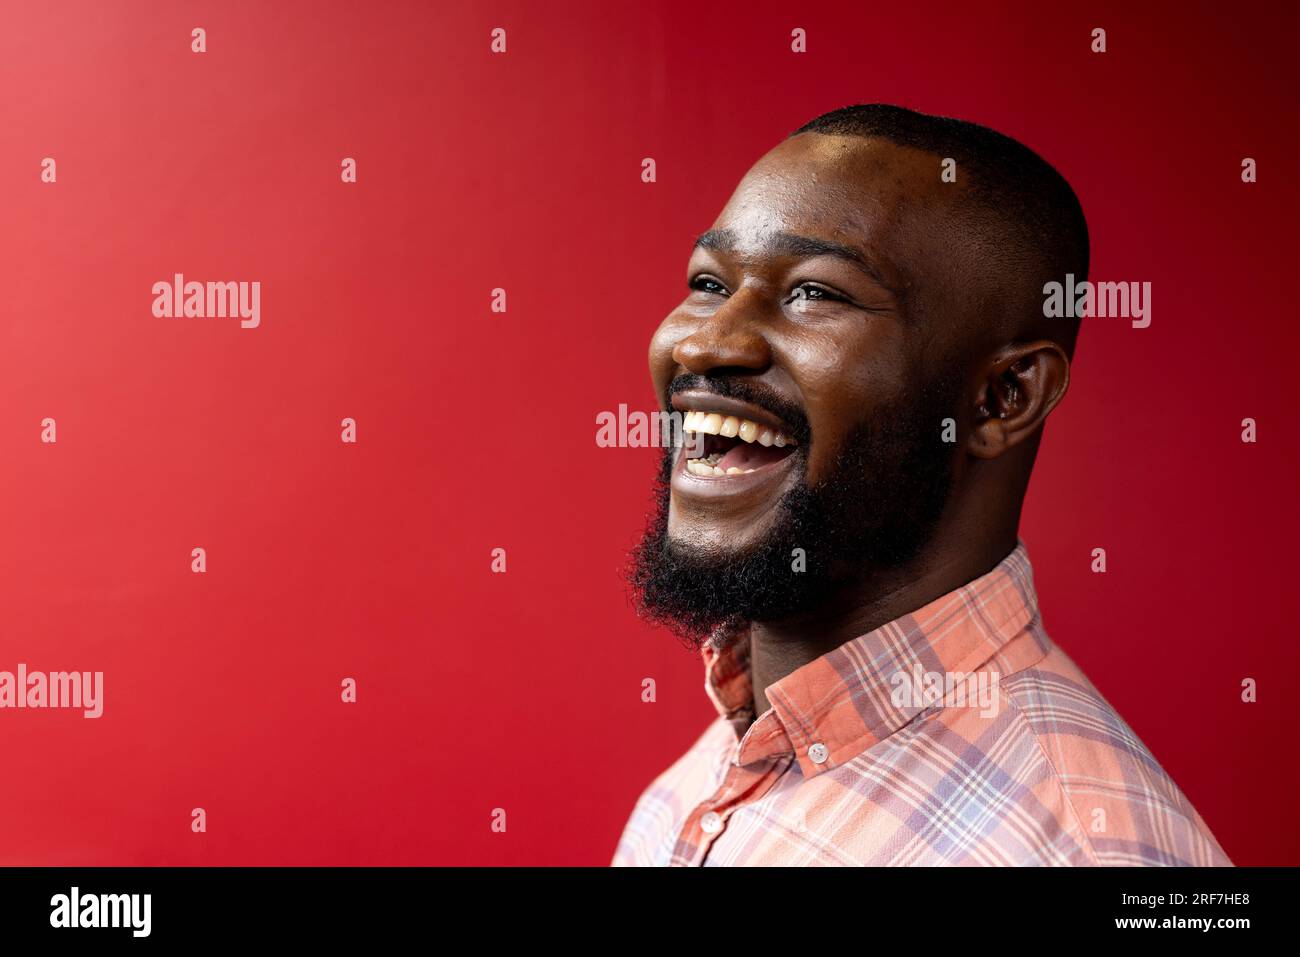 Side profile view of african american businessman smiling against red background, copy space Stock Photo